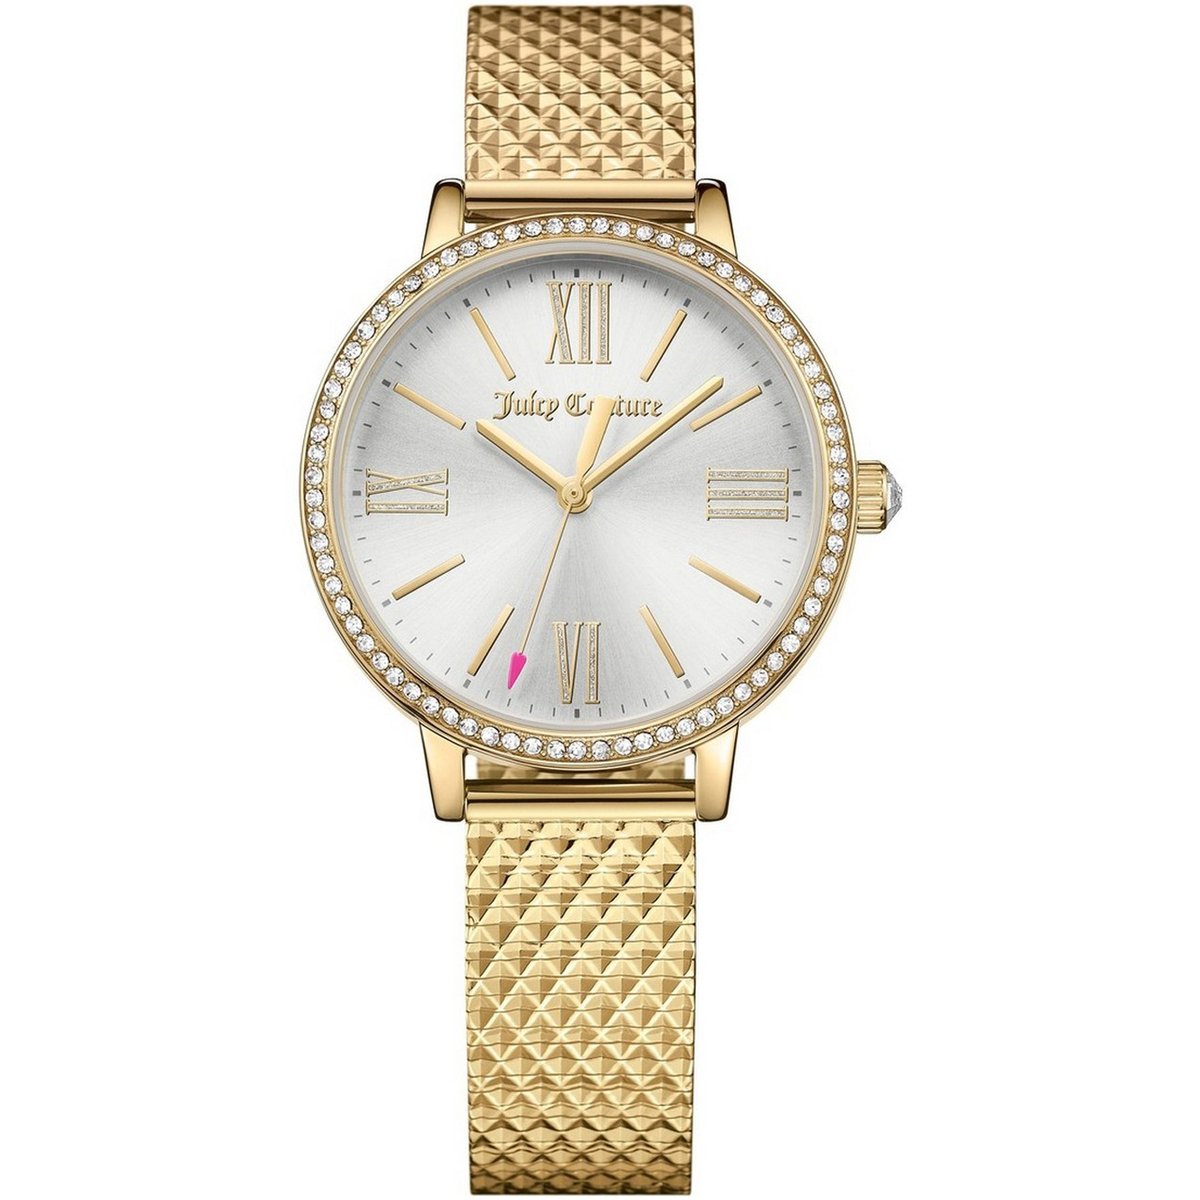 Juicy Couture Women's Analog Watch 1901613